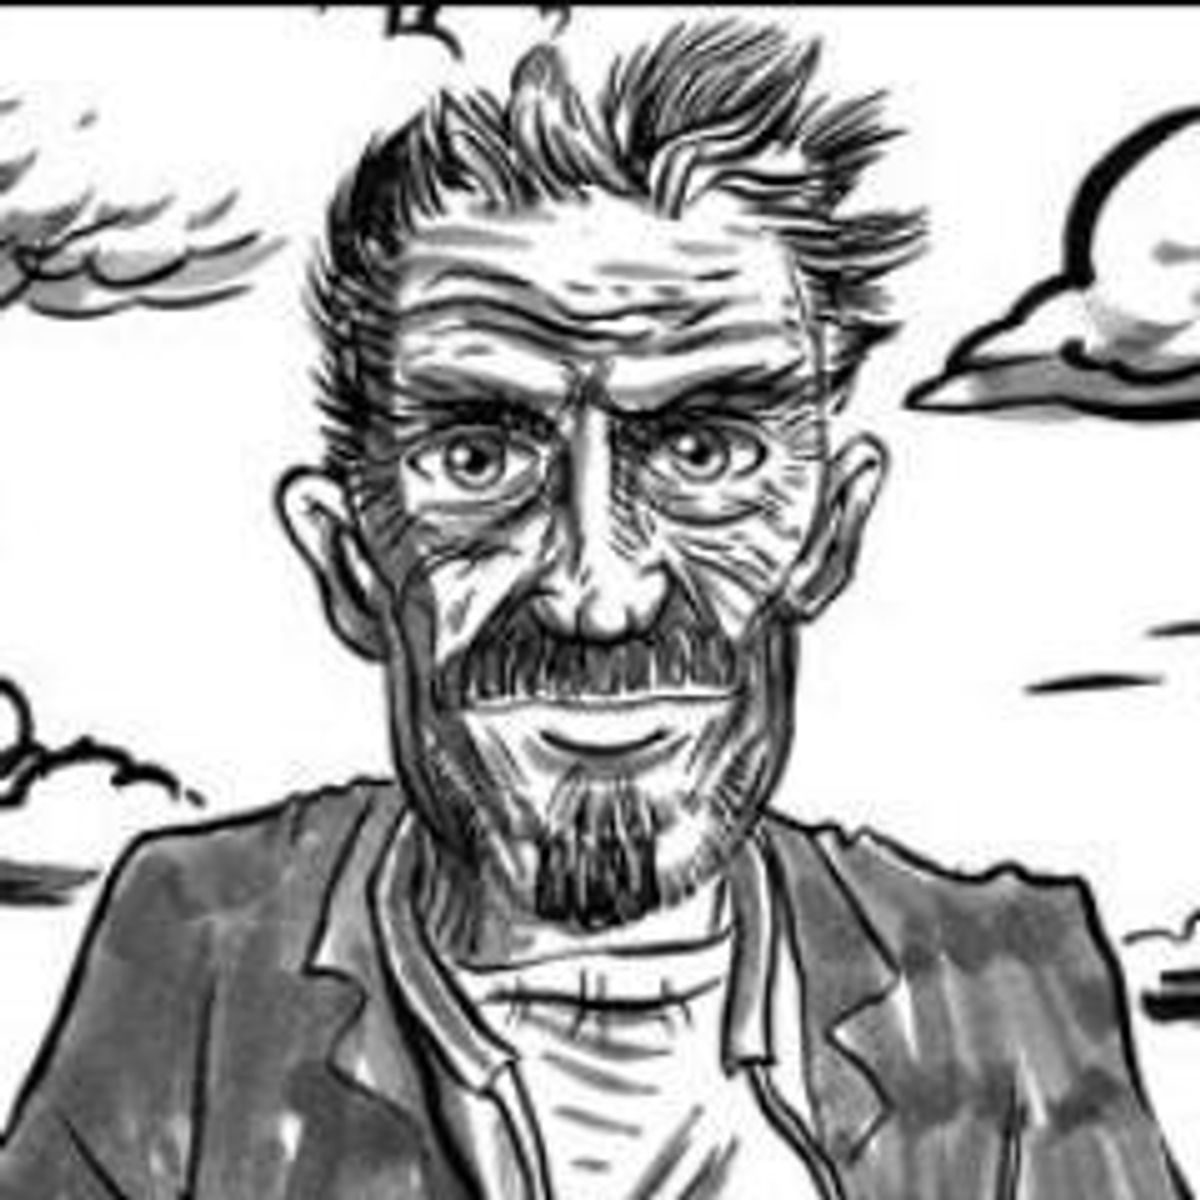  McAfee's Twitter profile image (via @officialmcafee)   